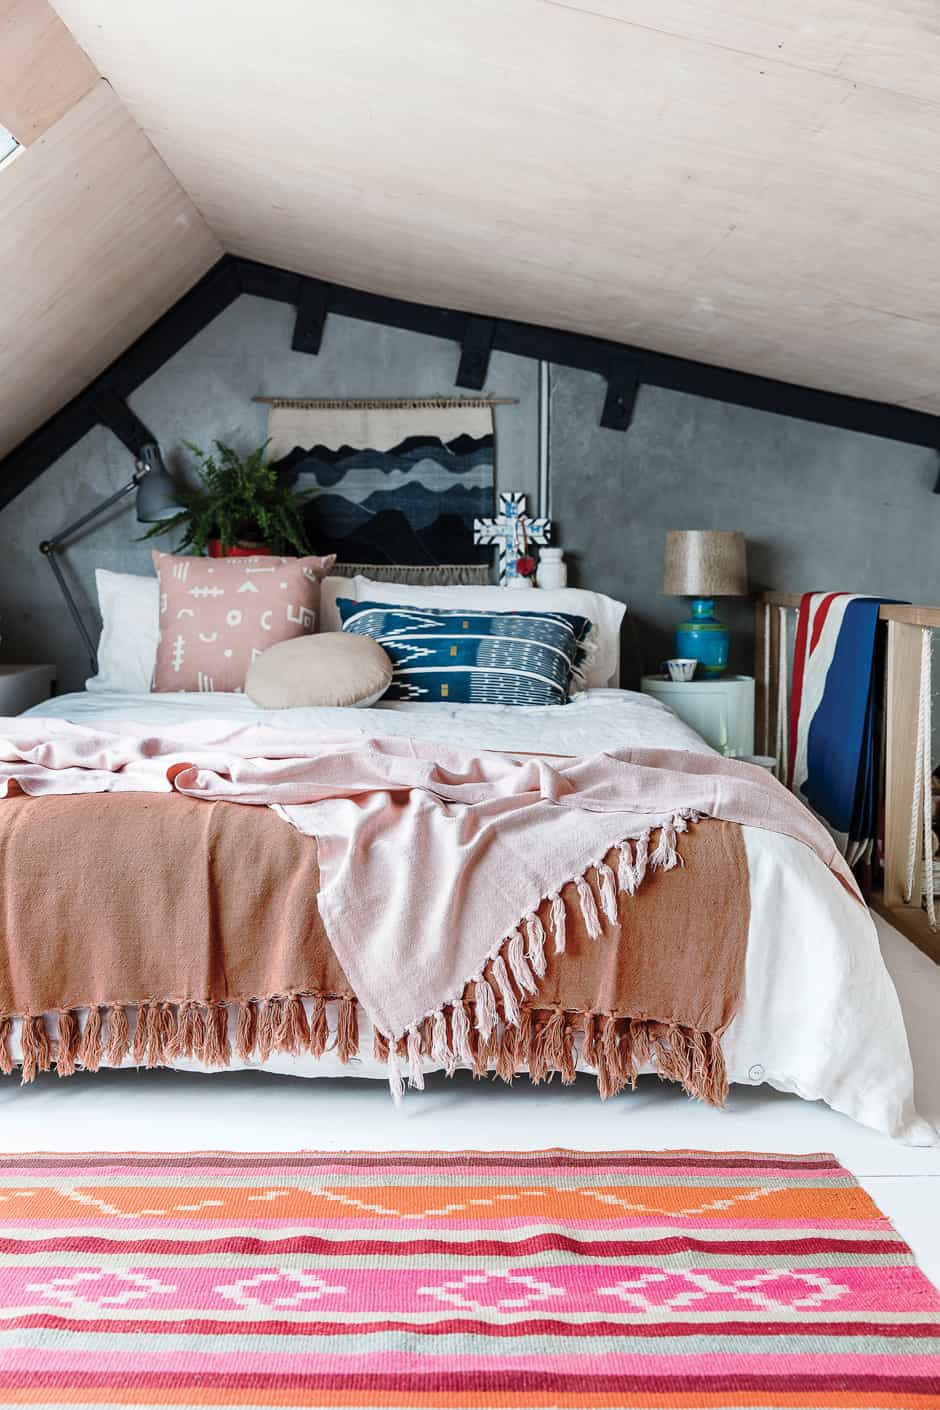 MASTER BEDROOM The couple’s attic bedroom is filled to the brim with an eclectic collection of items, including a rug from Argentina, throws by Citta Design and a Componibili storage unit by Anna Castelli Ferrieri for Kartell paired with a thrift store lamp. 